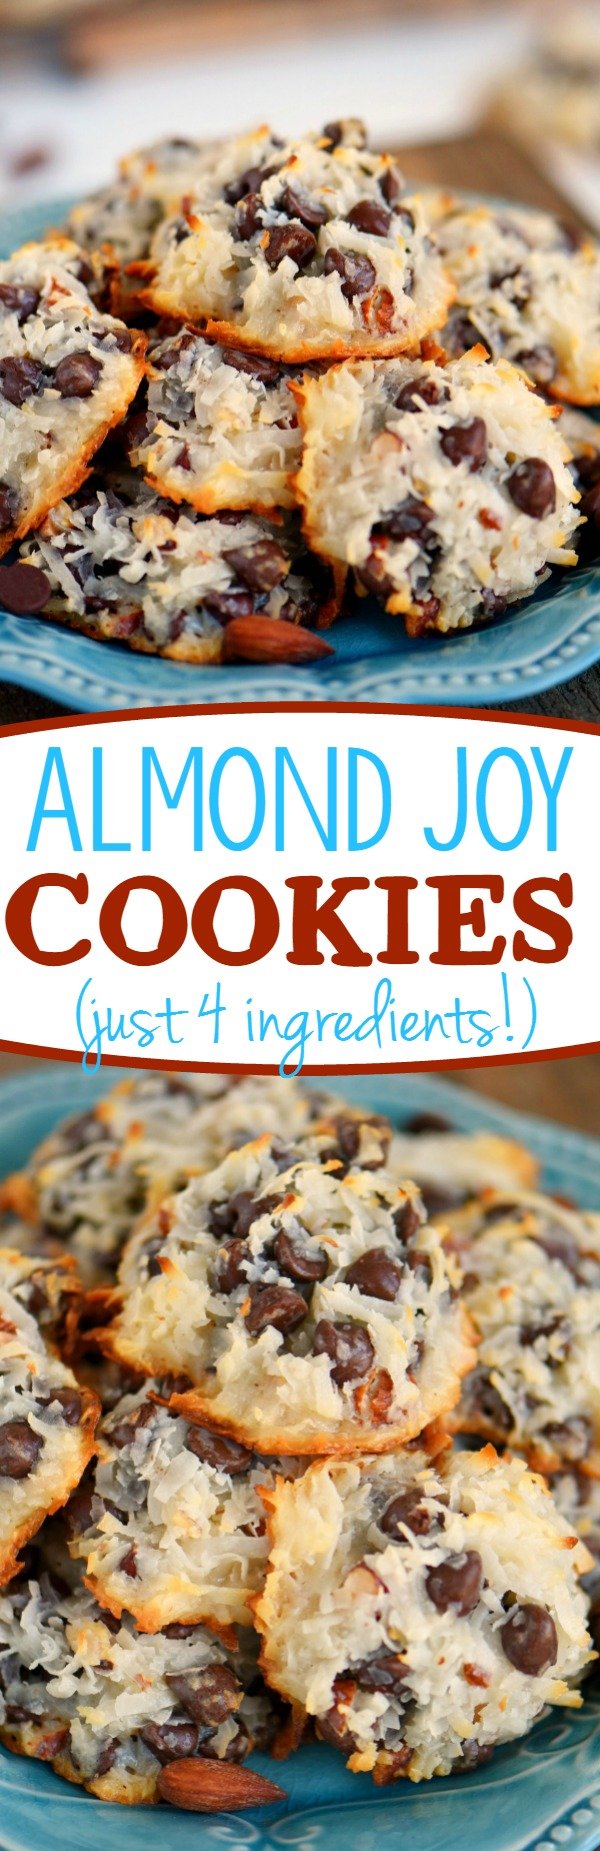 These easy Almond Joy Cookies take just four ingredients and don't even require a mixer! No beating, no chilling, just mix 'em up and throw 'em in the oven EASY! You're going to love these ooey gooey fabulous cookies!